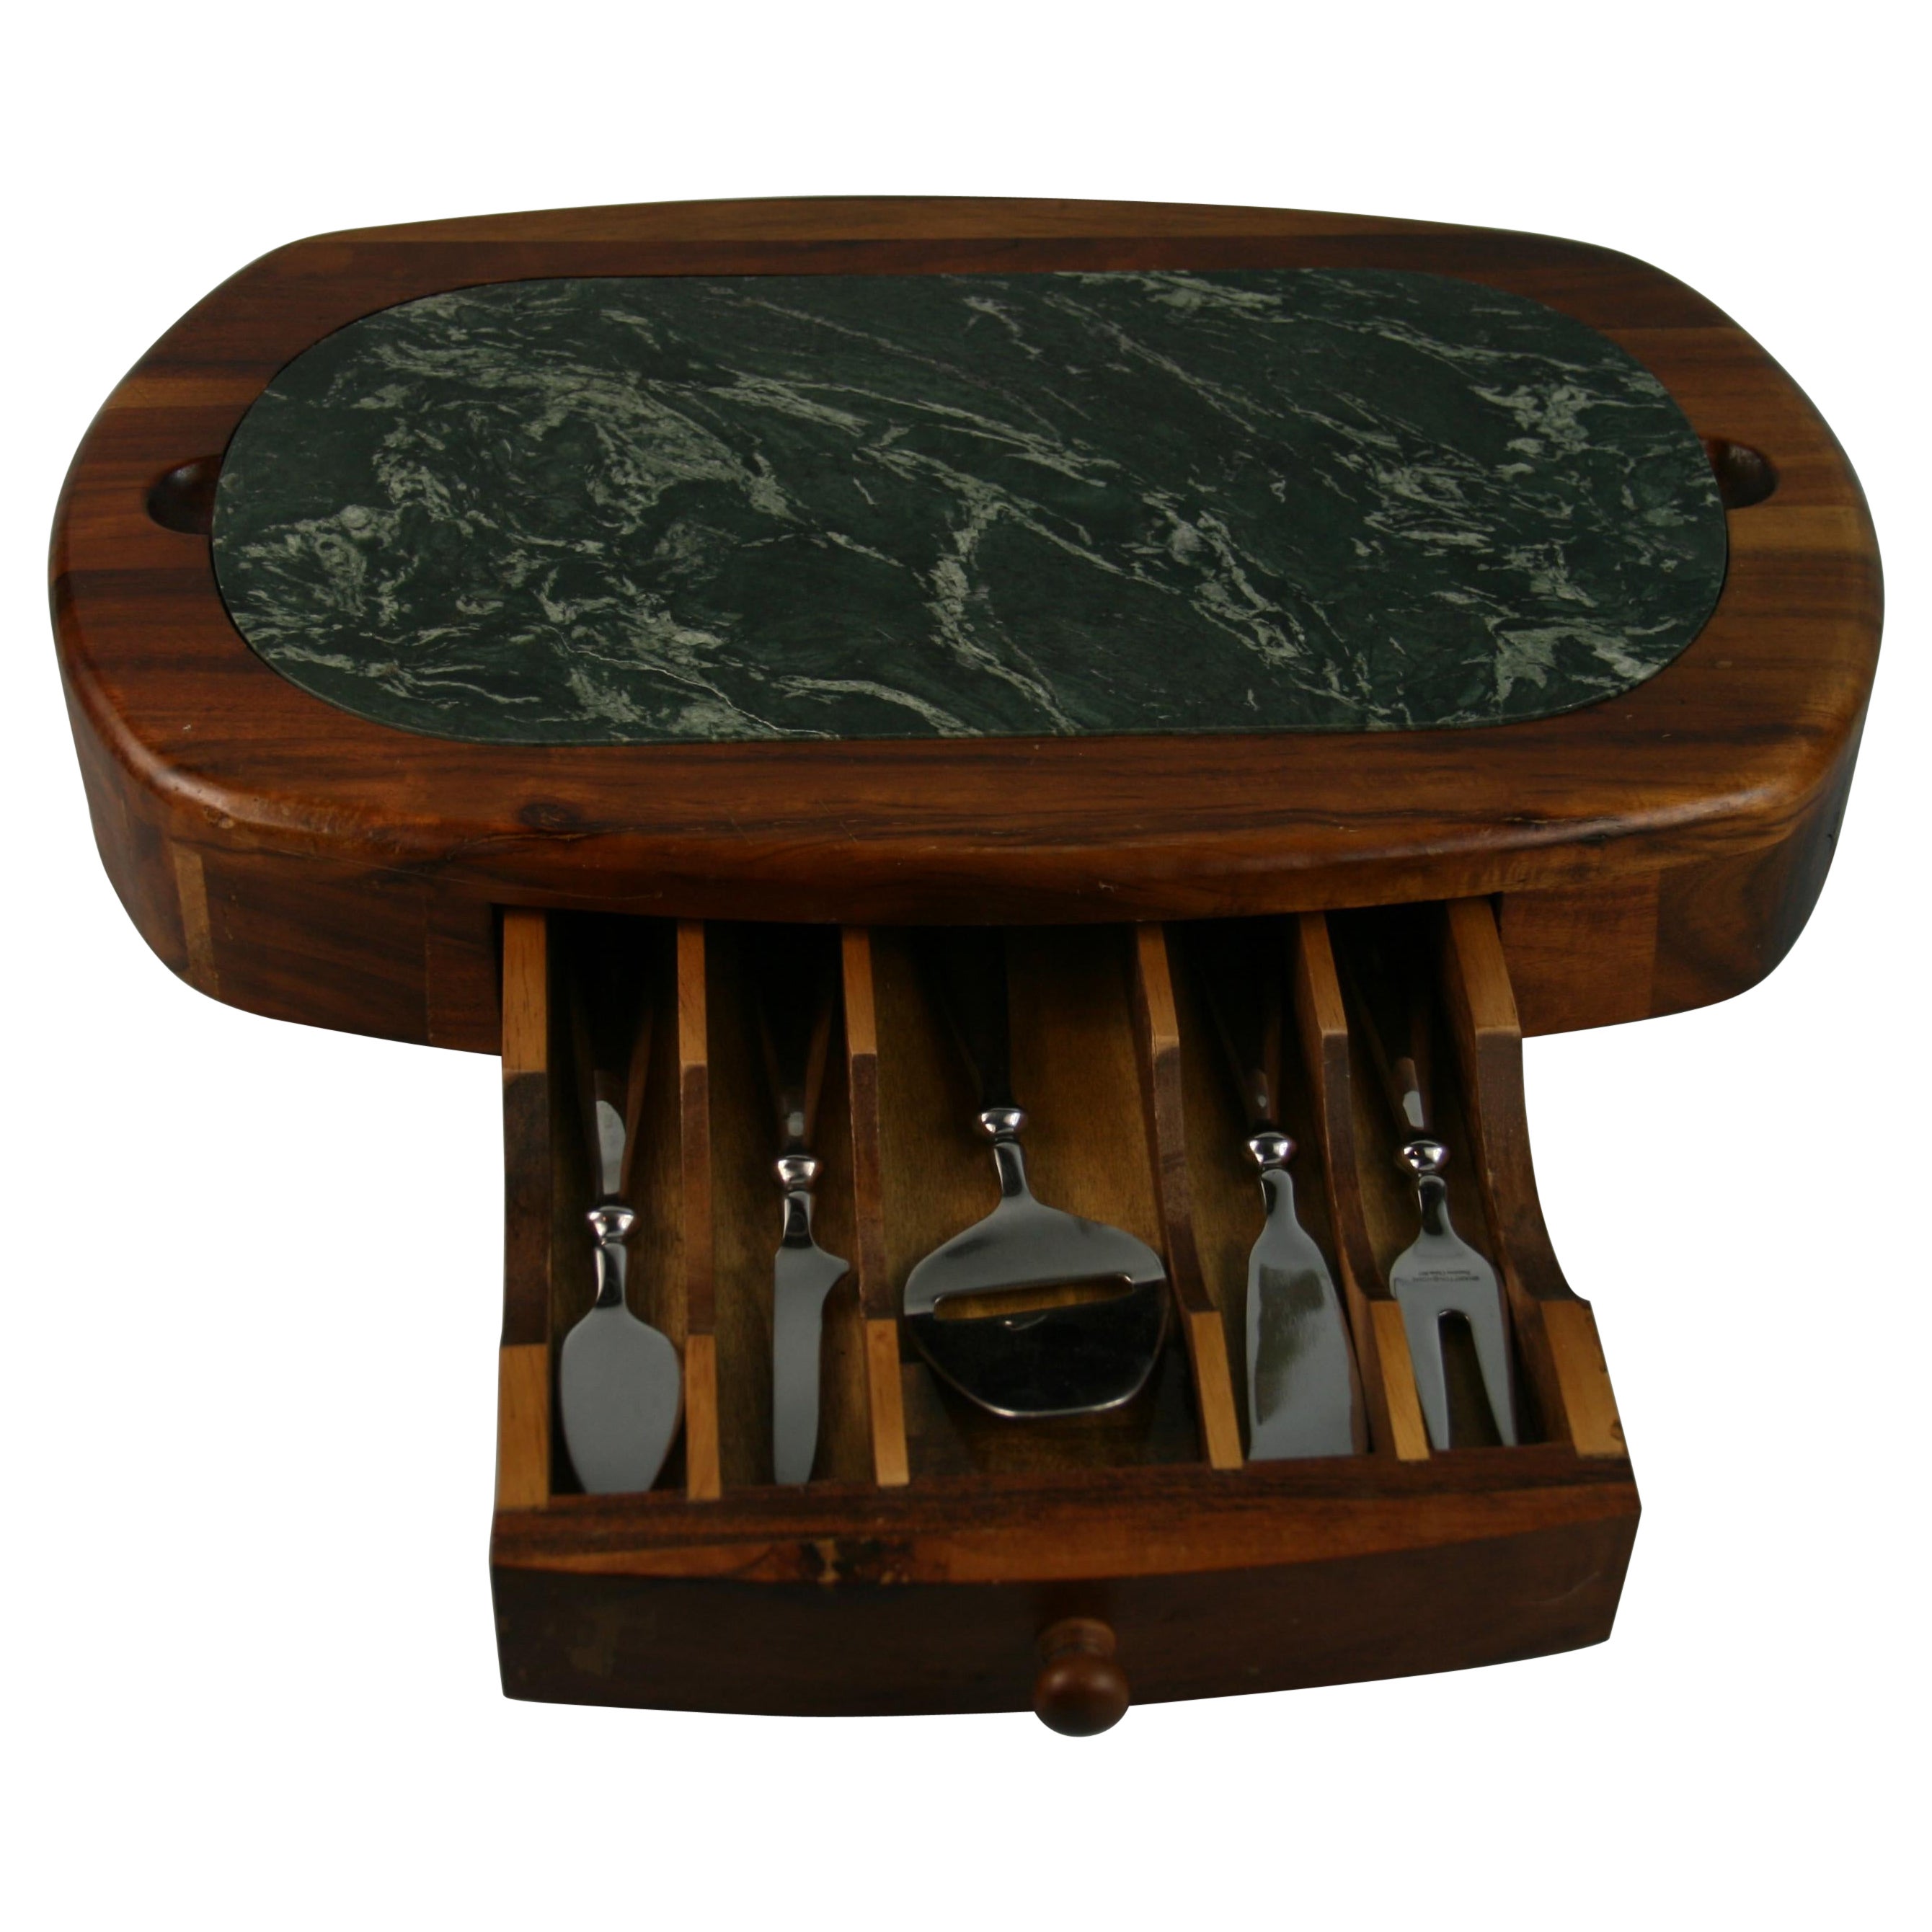 Green Marble and Wood Cheese Board with 5 Stainless Steel Knives